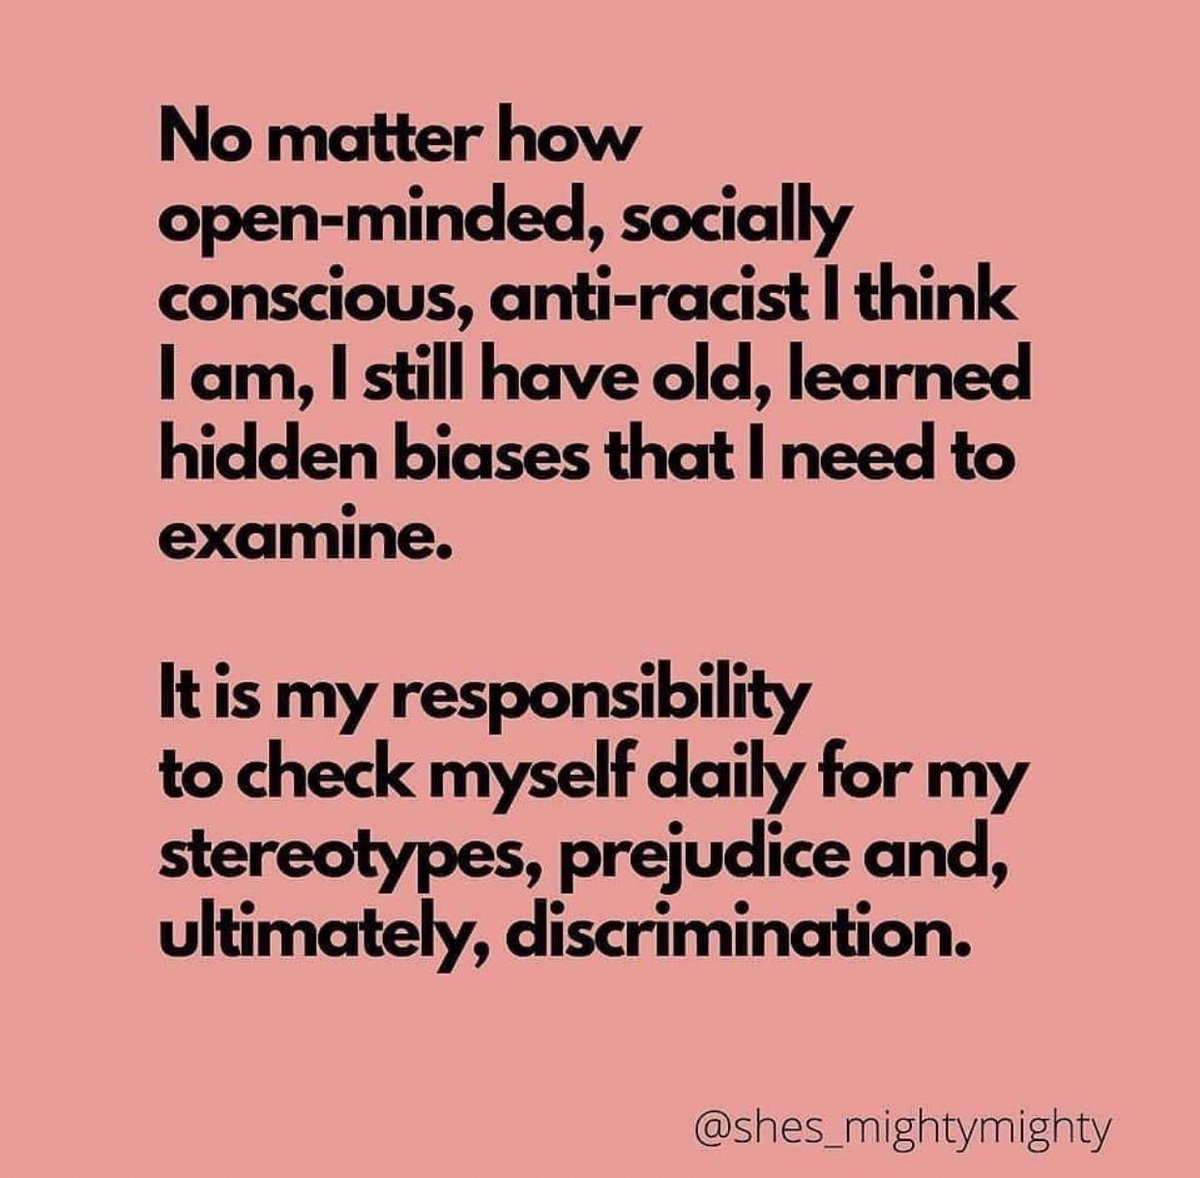 Ask yourself DAILY. Every. Single. Day. No matter how much we learn, or how much we think we know, we can always improve, always do better. Keep learning. #gender #birth #culture #LGBTQ #POC #Indigenous #disability #pregnancy #ethnicity #medicalcondition #diversity #age #religion